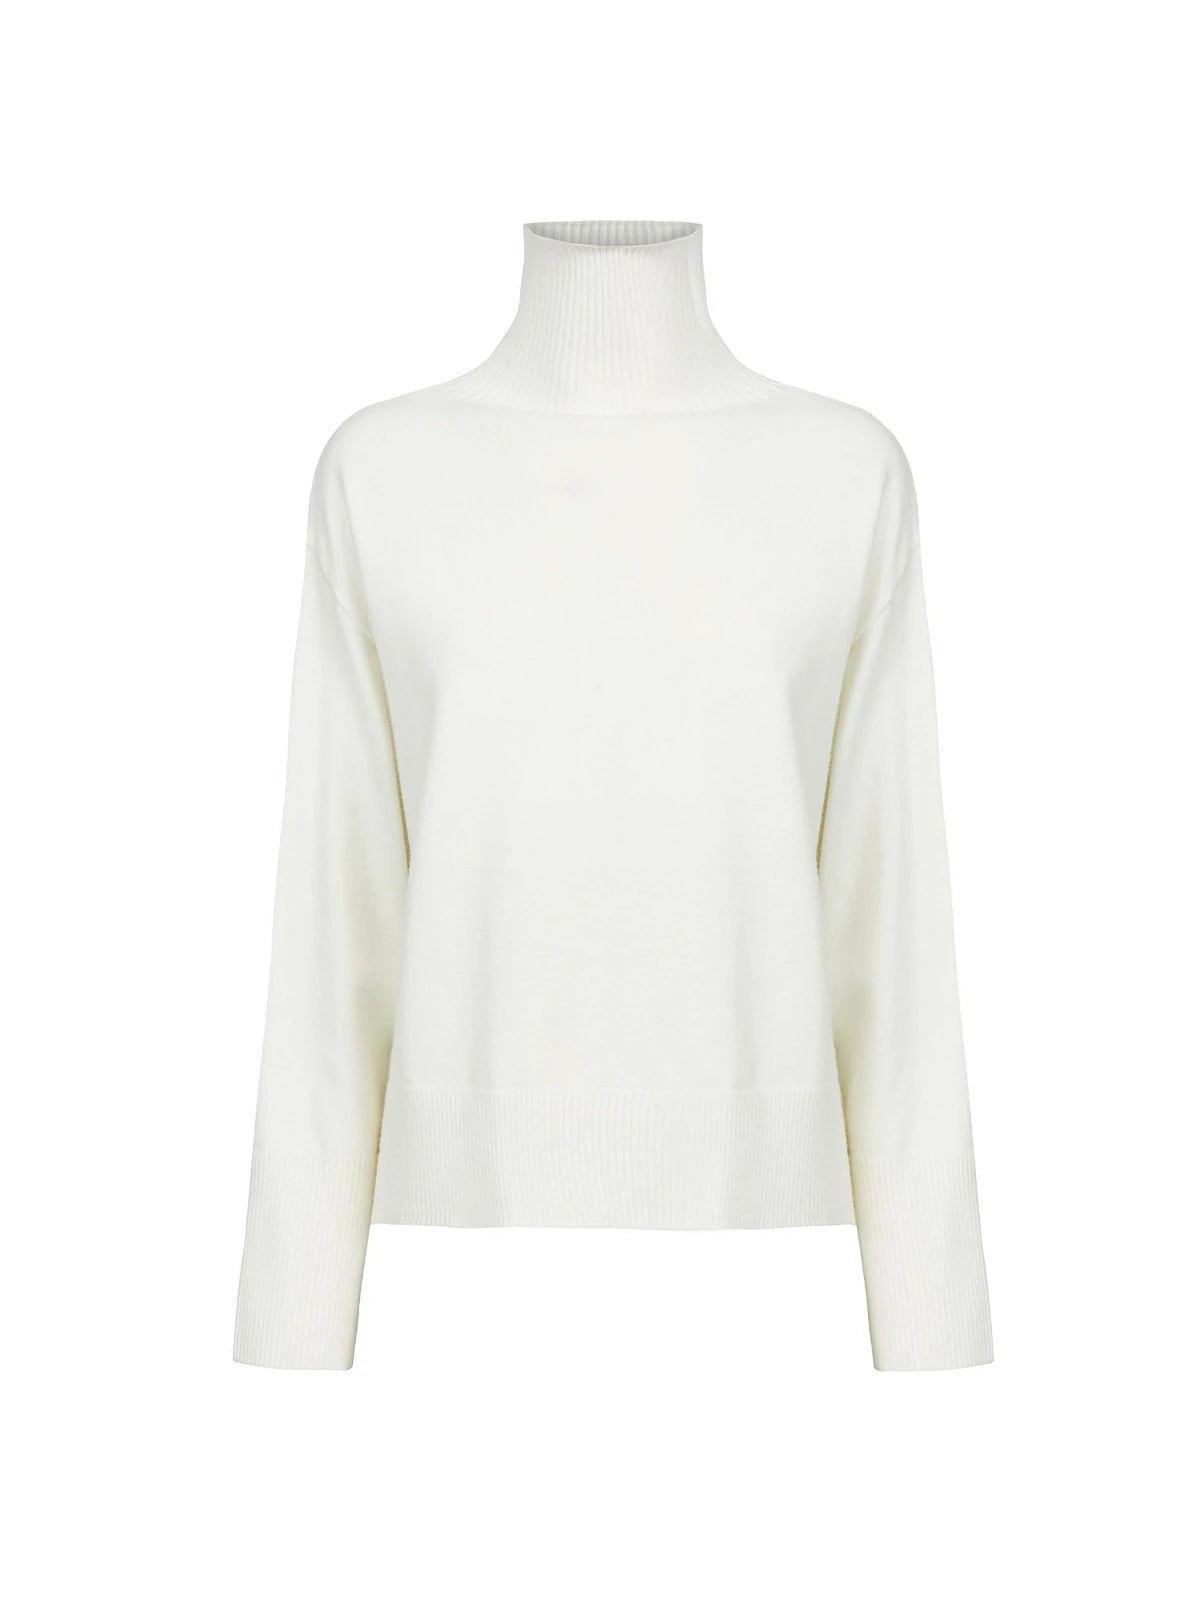 Stylish White Knitted Turtleneck with Understated Ribbed Appeal